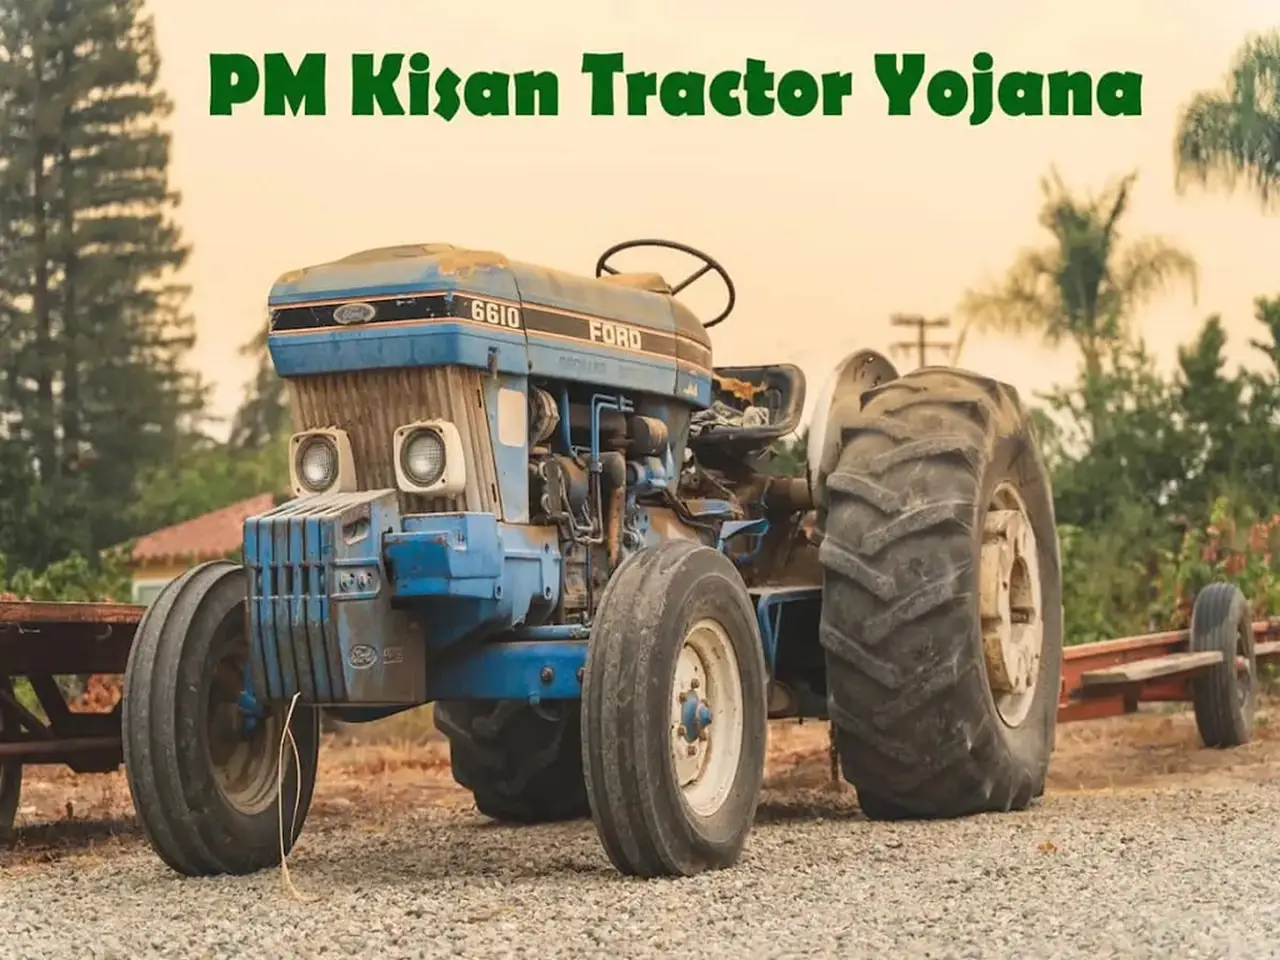 Tractor Farmers who are struggling financially as well as small and marginal farmers will receive a 20–50% subsidy on the purchase of tractors